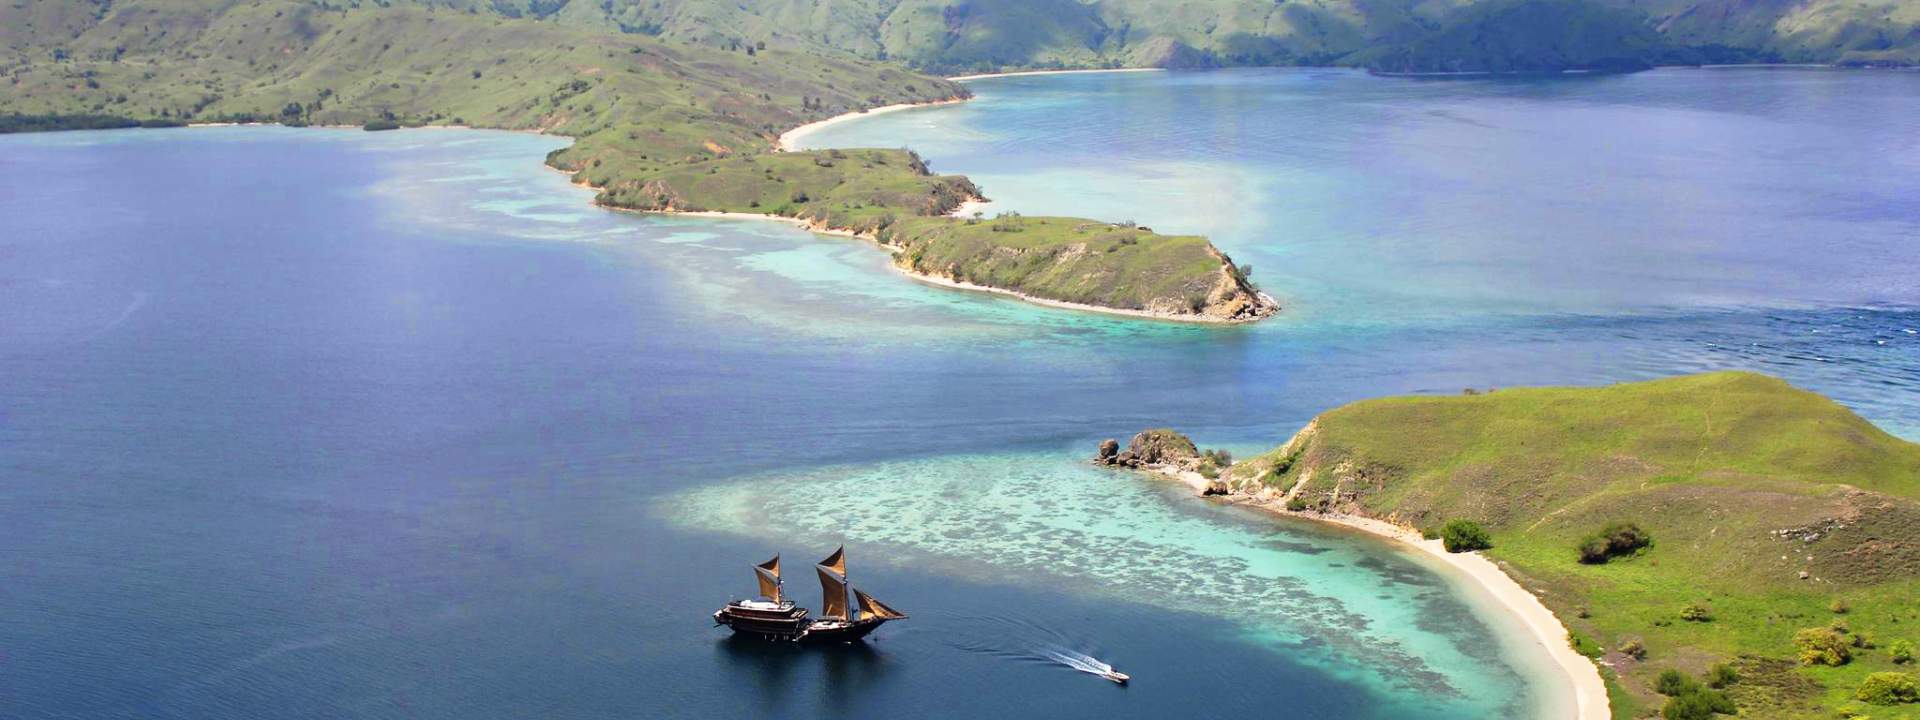 Private Cruise on a Traditional sailing boat in Komodo